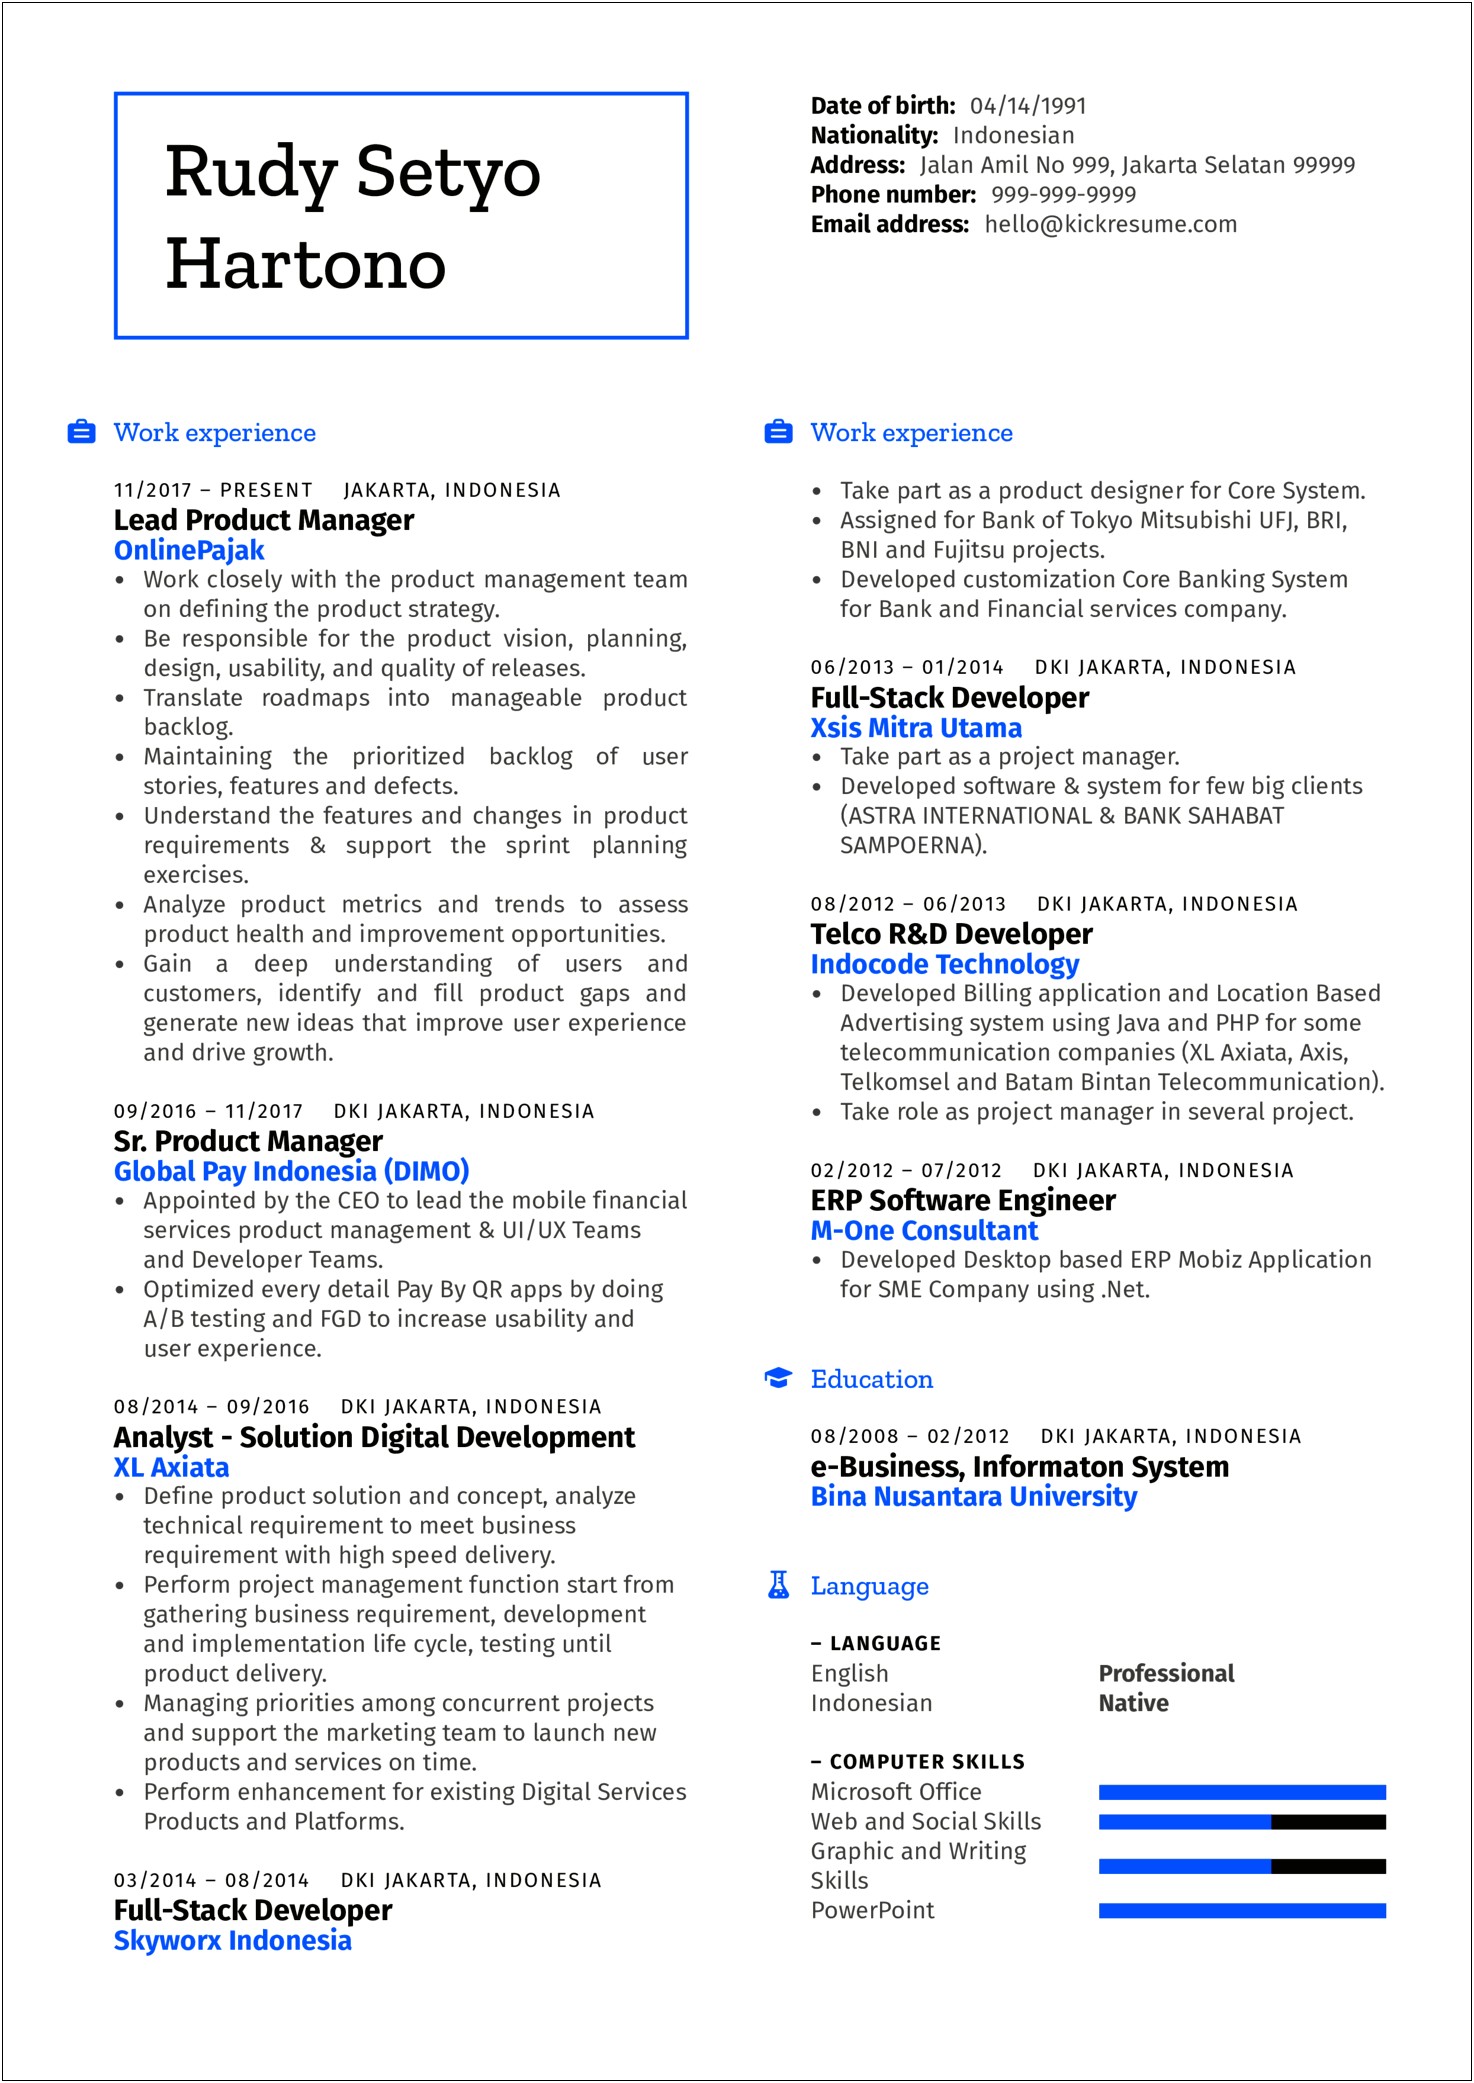 Life Experience Skills Section Of Resume